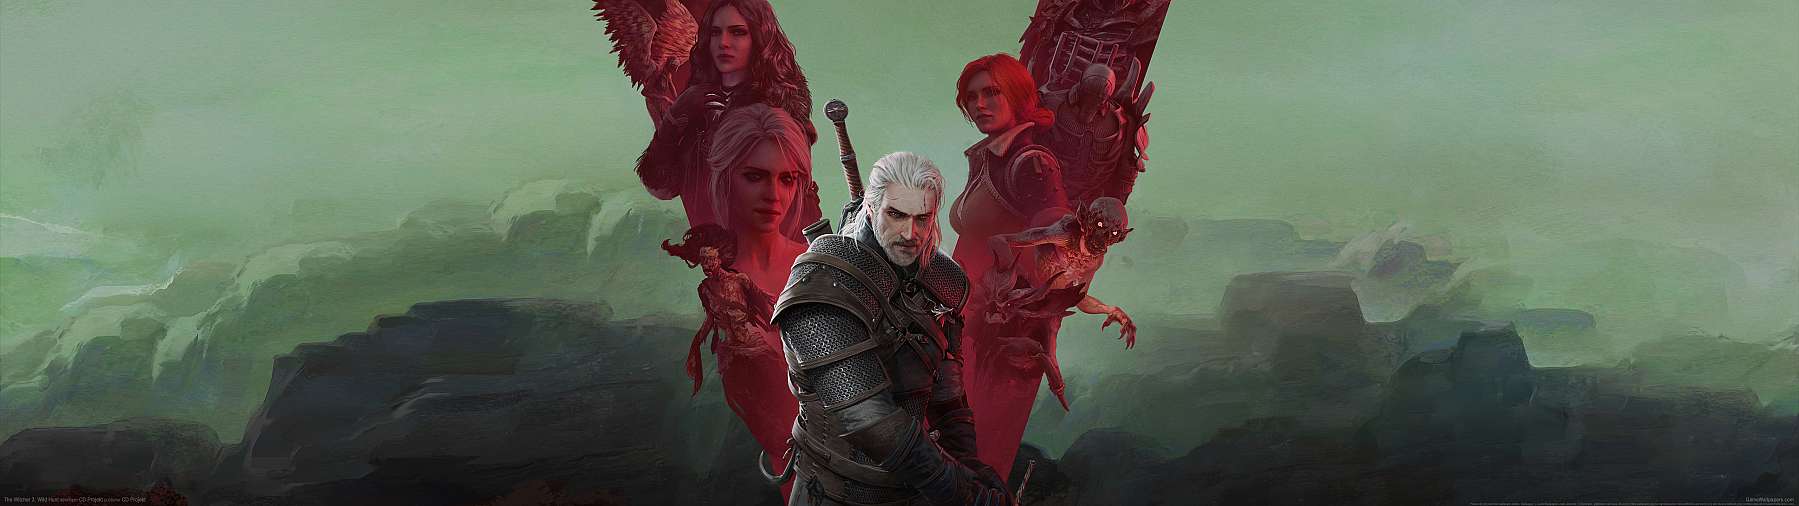 The Witcher 3: Wild Hunt superwide wallpaper or background 33